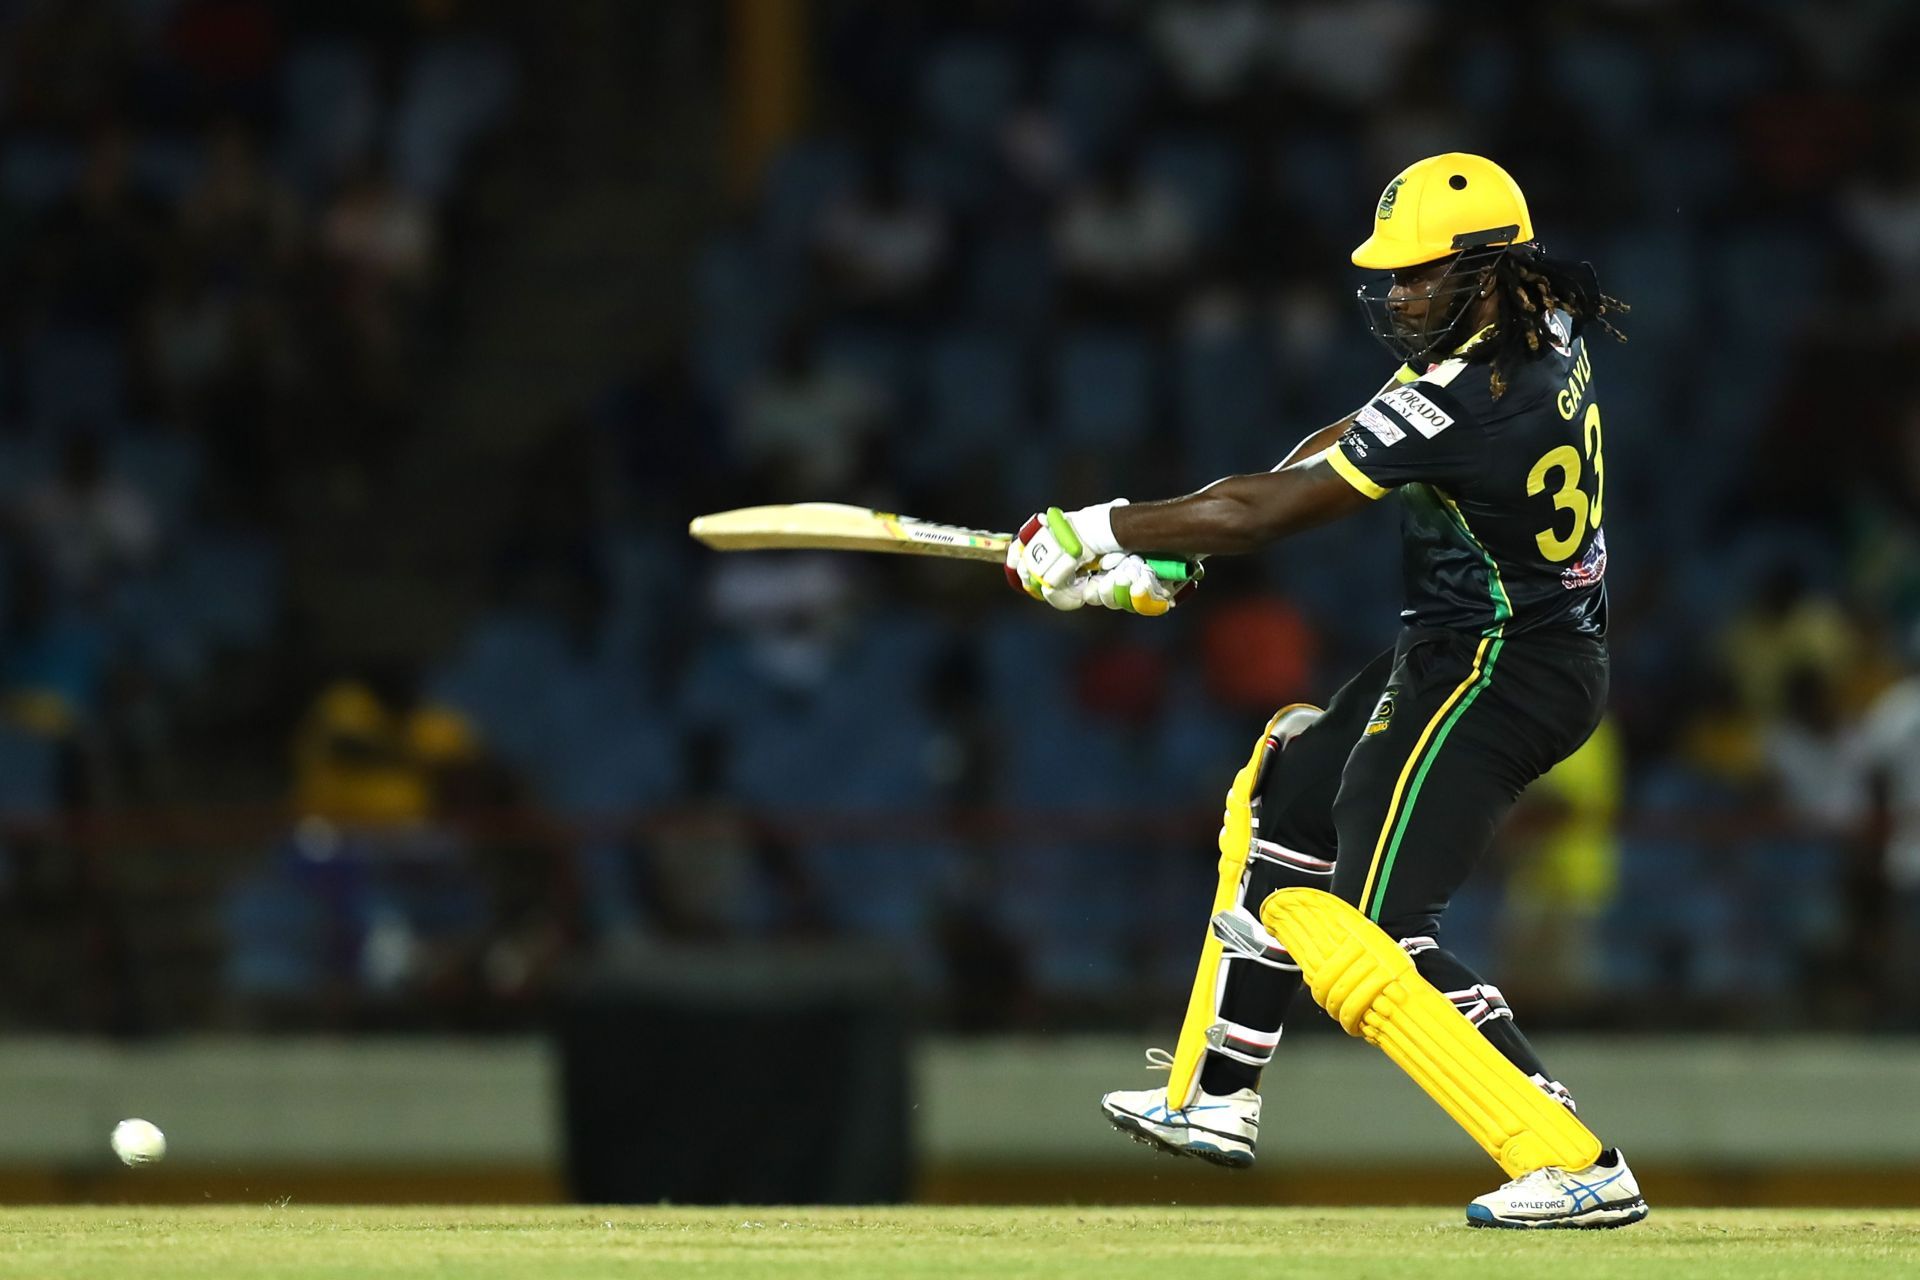 Chris Gayle looked in good touch during the first game against Bangla Tigers